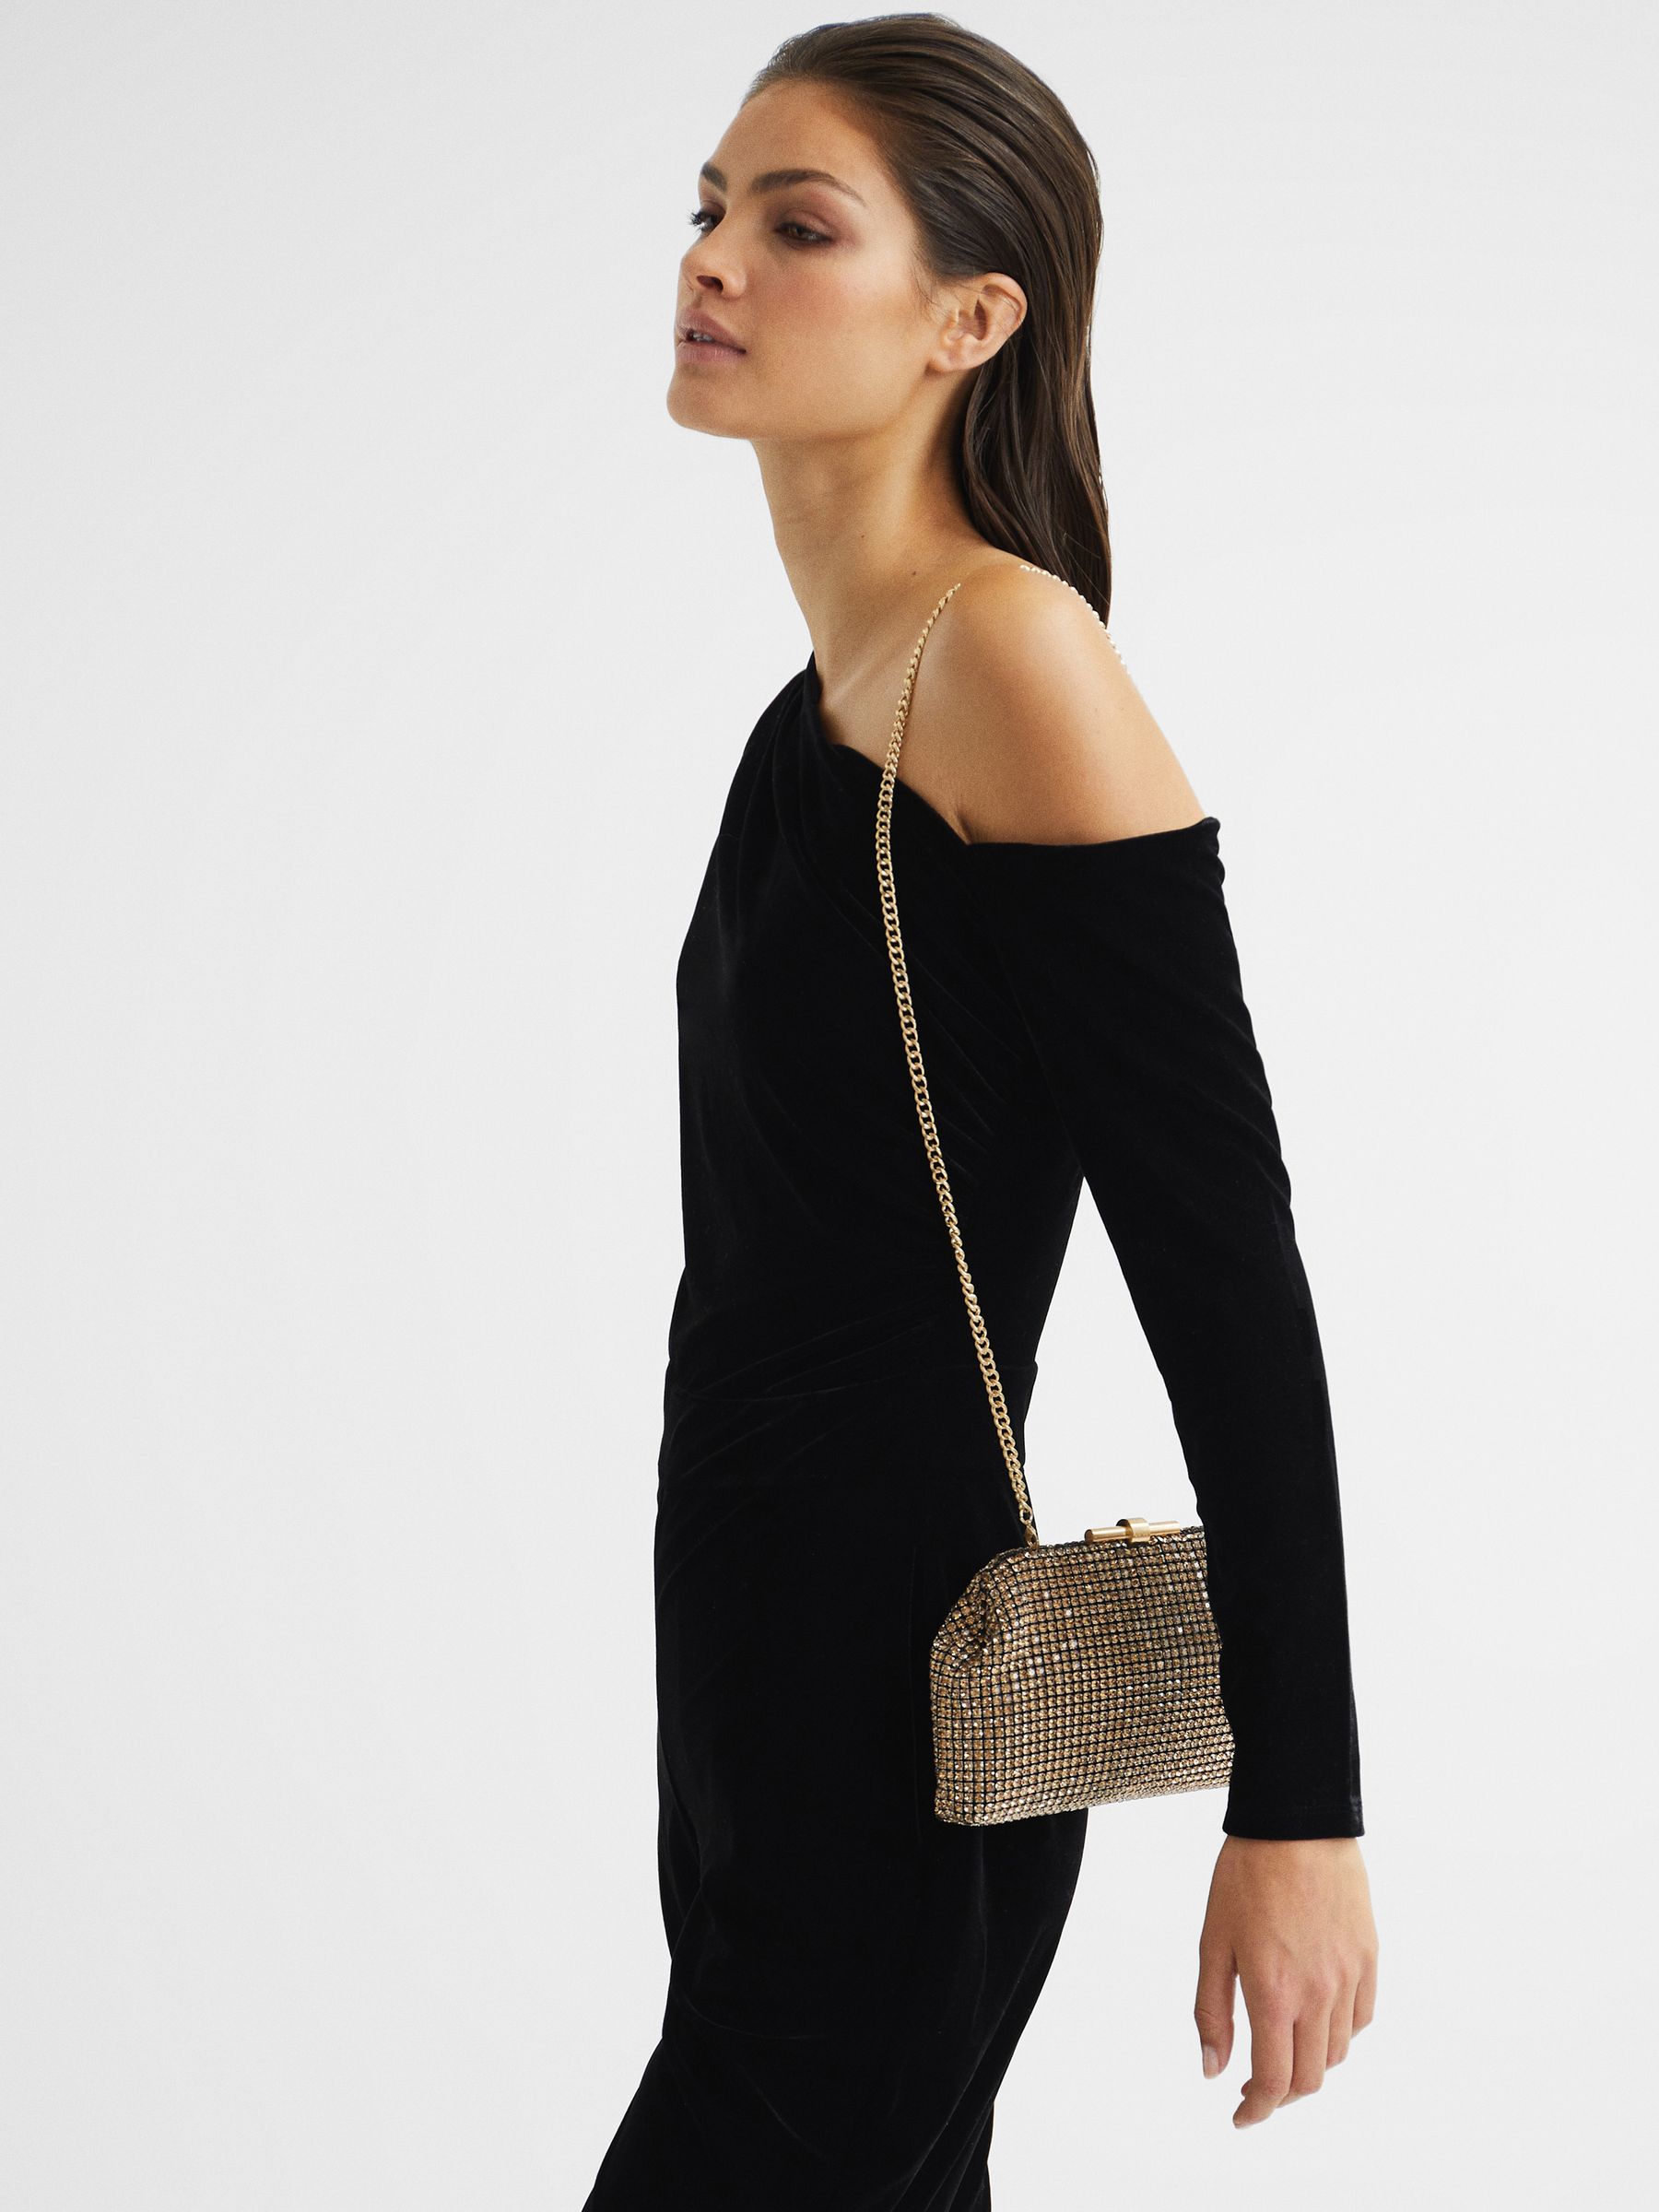 Embellished Clutch Bag in Gold - REISS